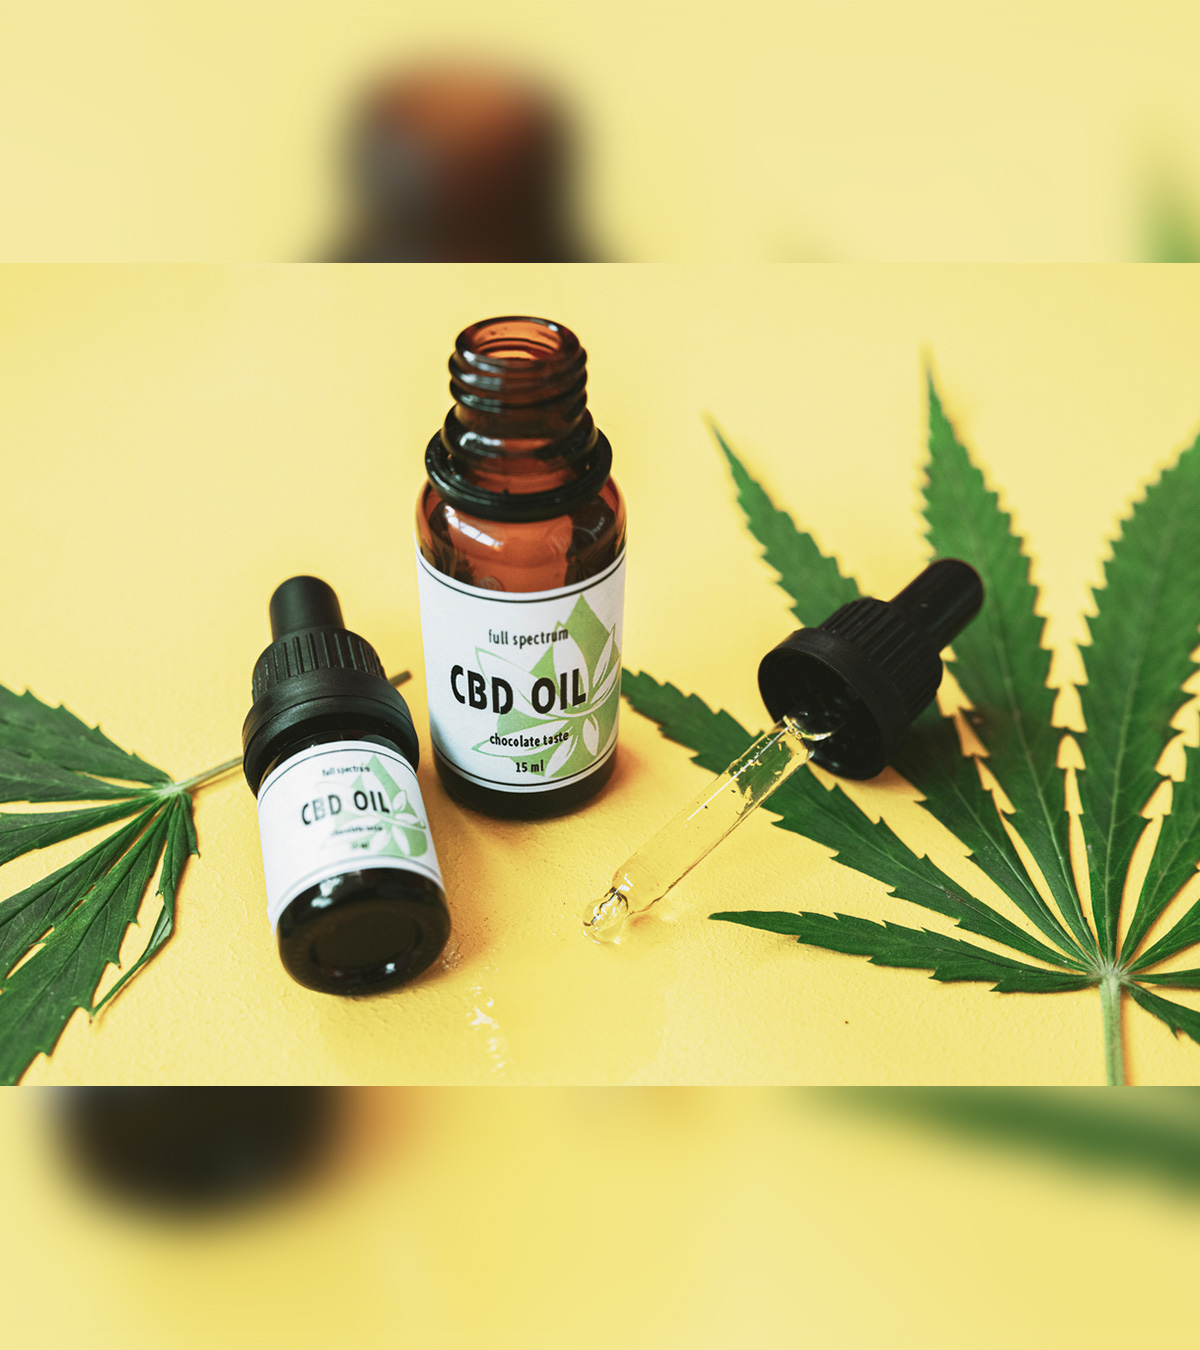 Is CBD Oil Safe For Children With Anxiety And ADHD?